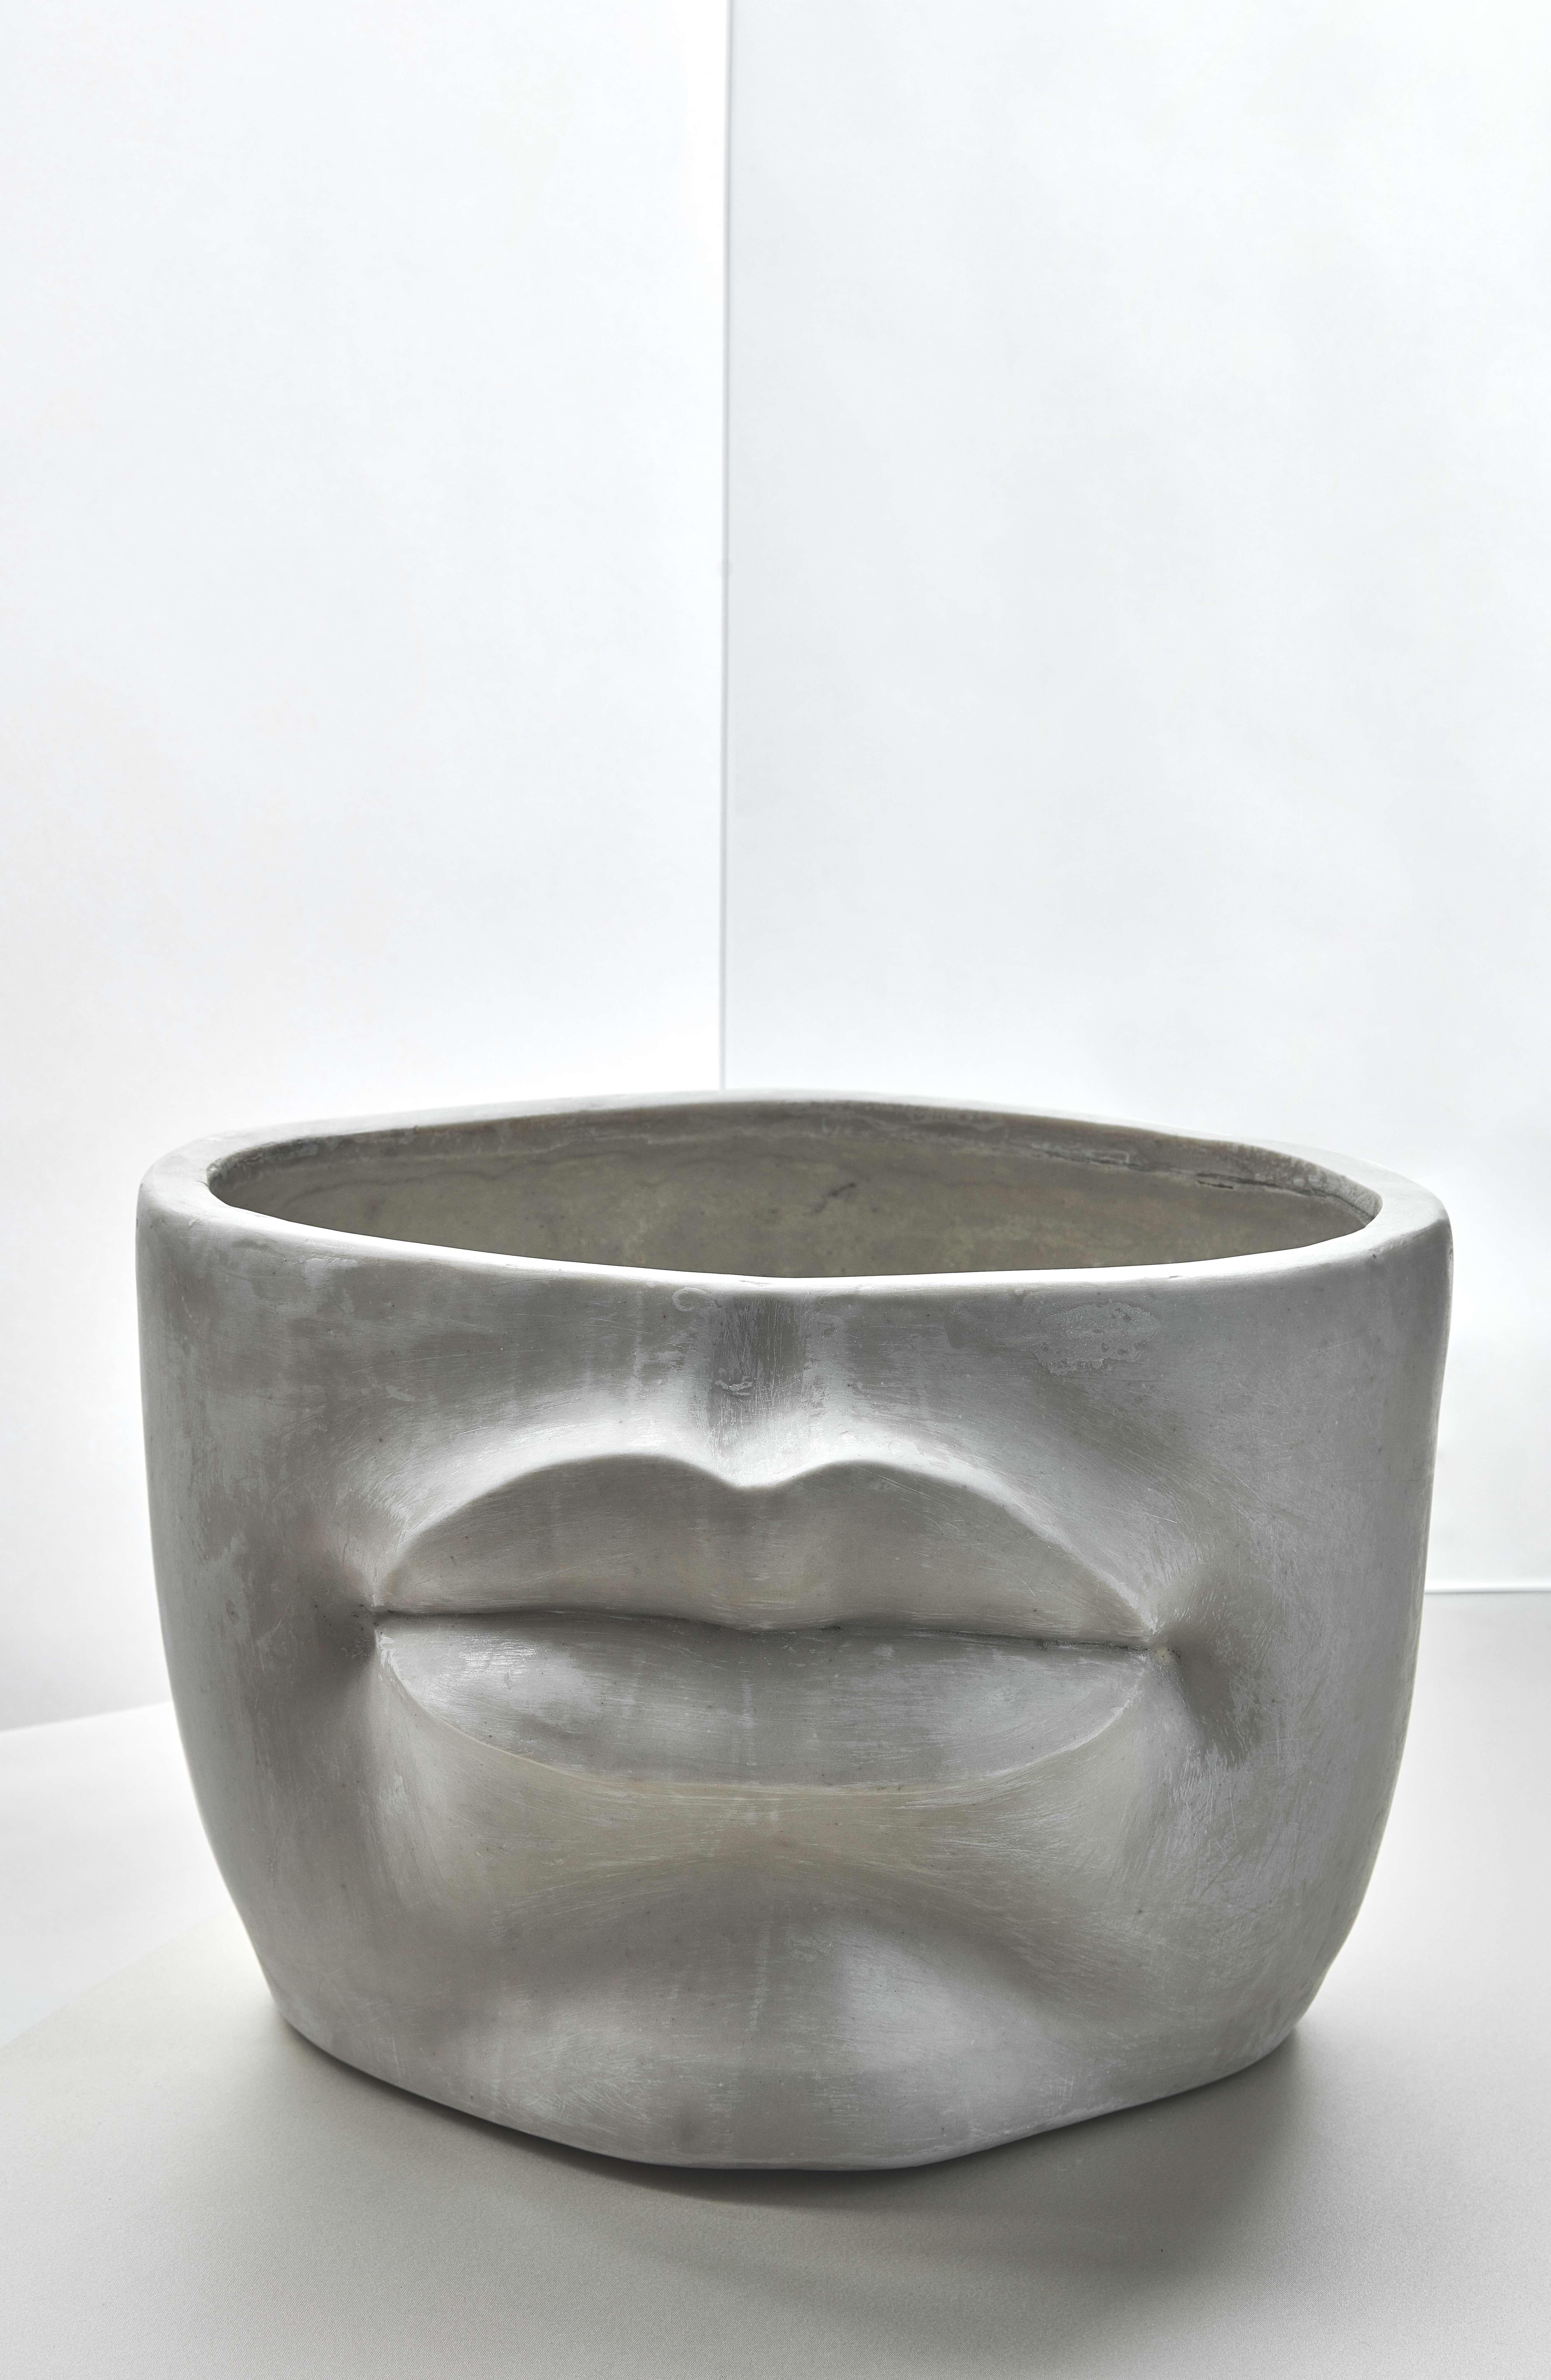 La Bocca Sculptural Hand-Crafted Resin and Stone Bowl of Lips (Sonstiges) im Angebot